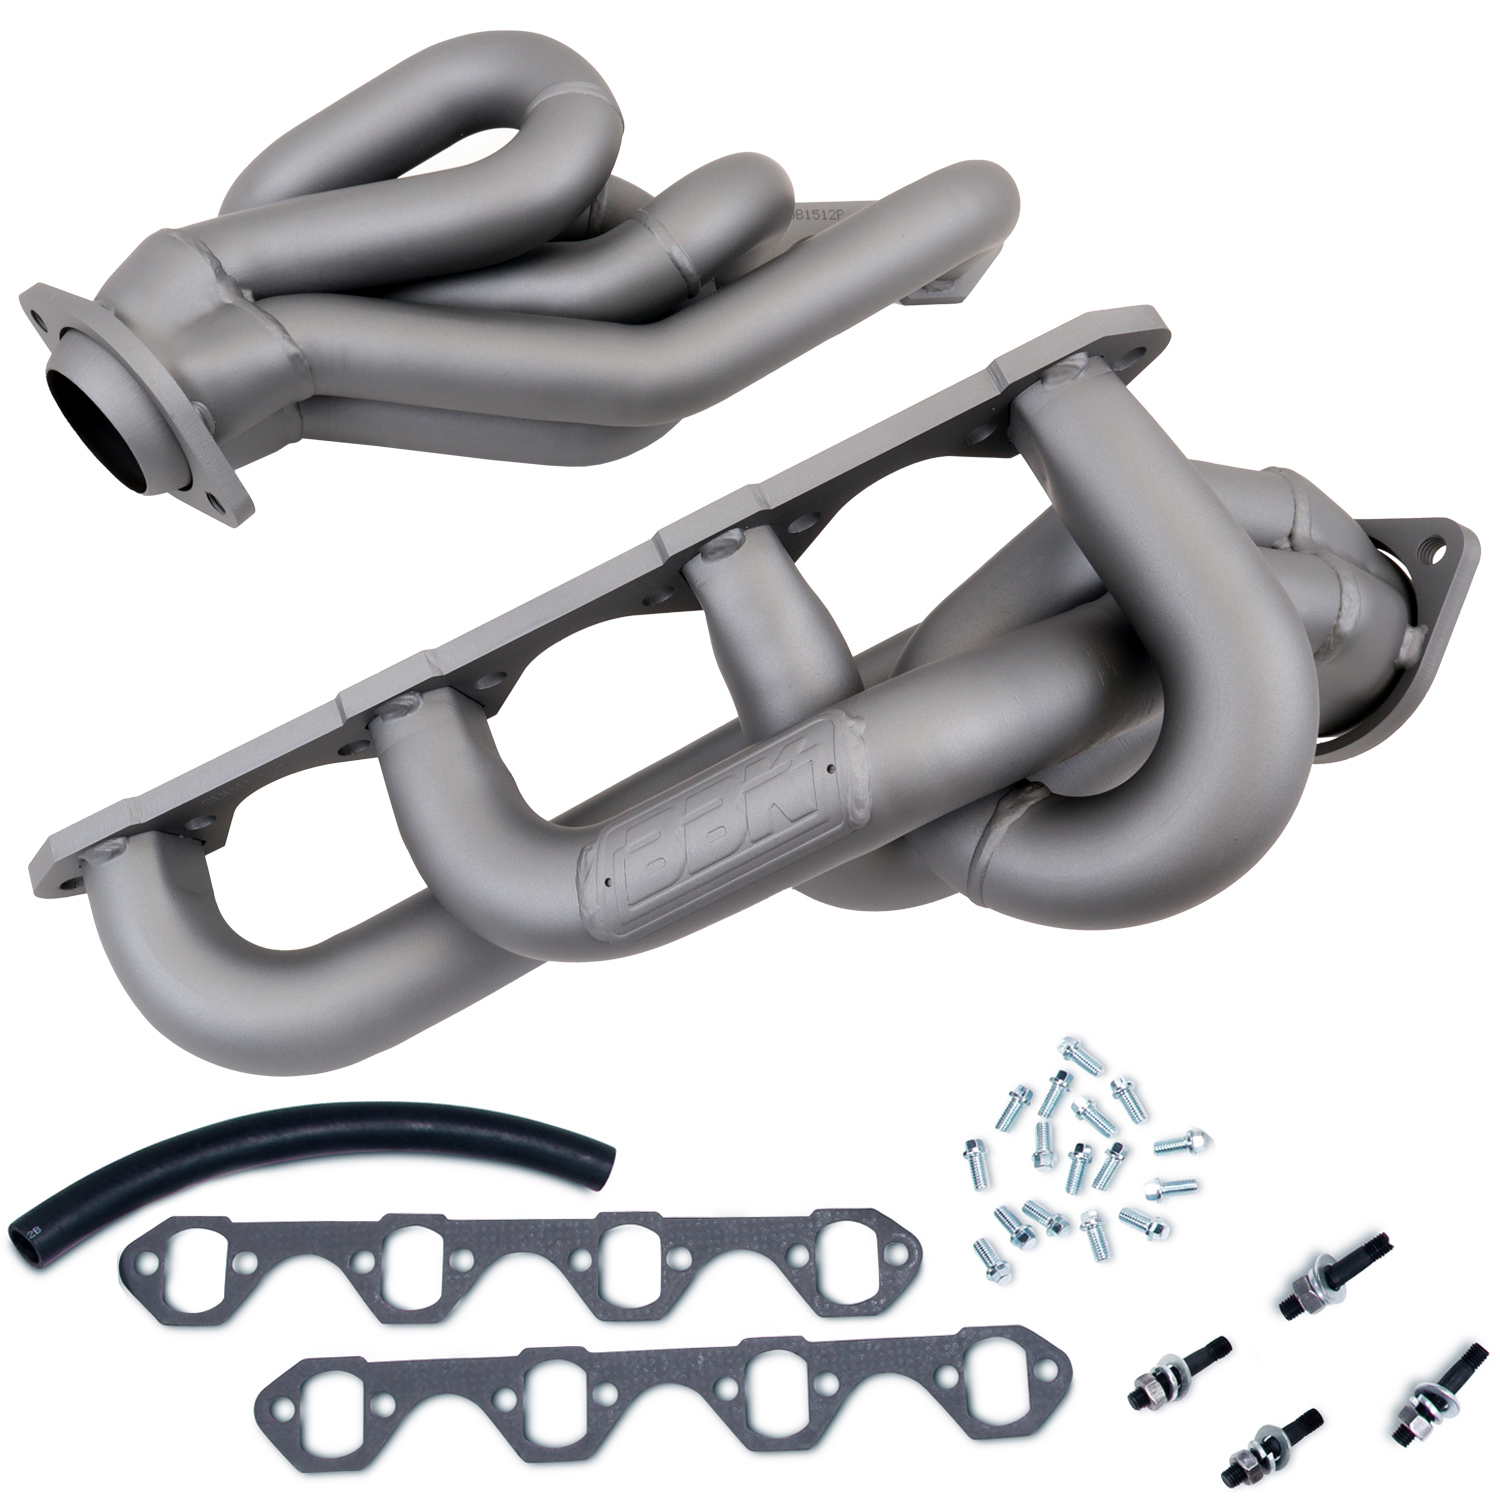 BBK Performance 1512 Headers, Equal Length Shorty, 1-5/8 in Primary, Stock Collector Flange, Steel, Chrome, Small Block Ford, Ford Mustang 1986-93, Pair